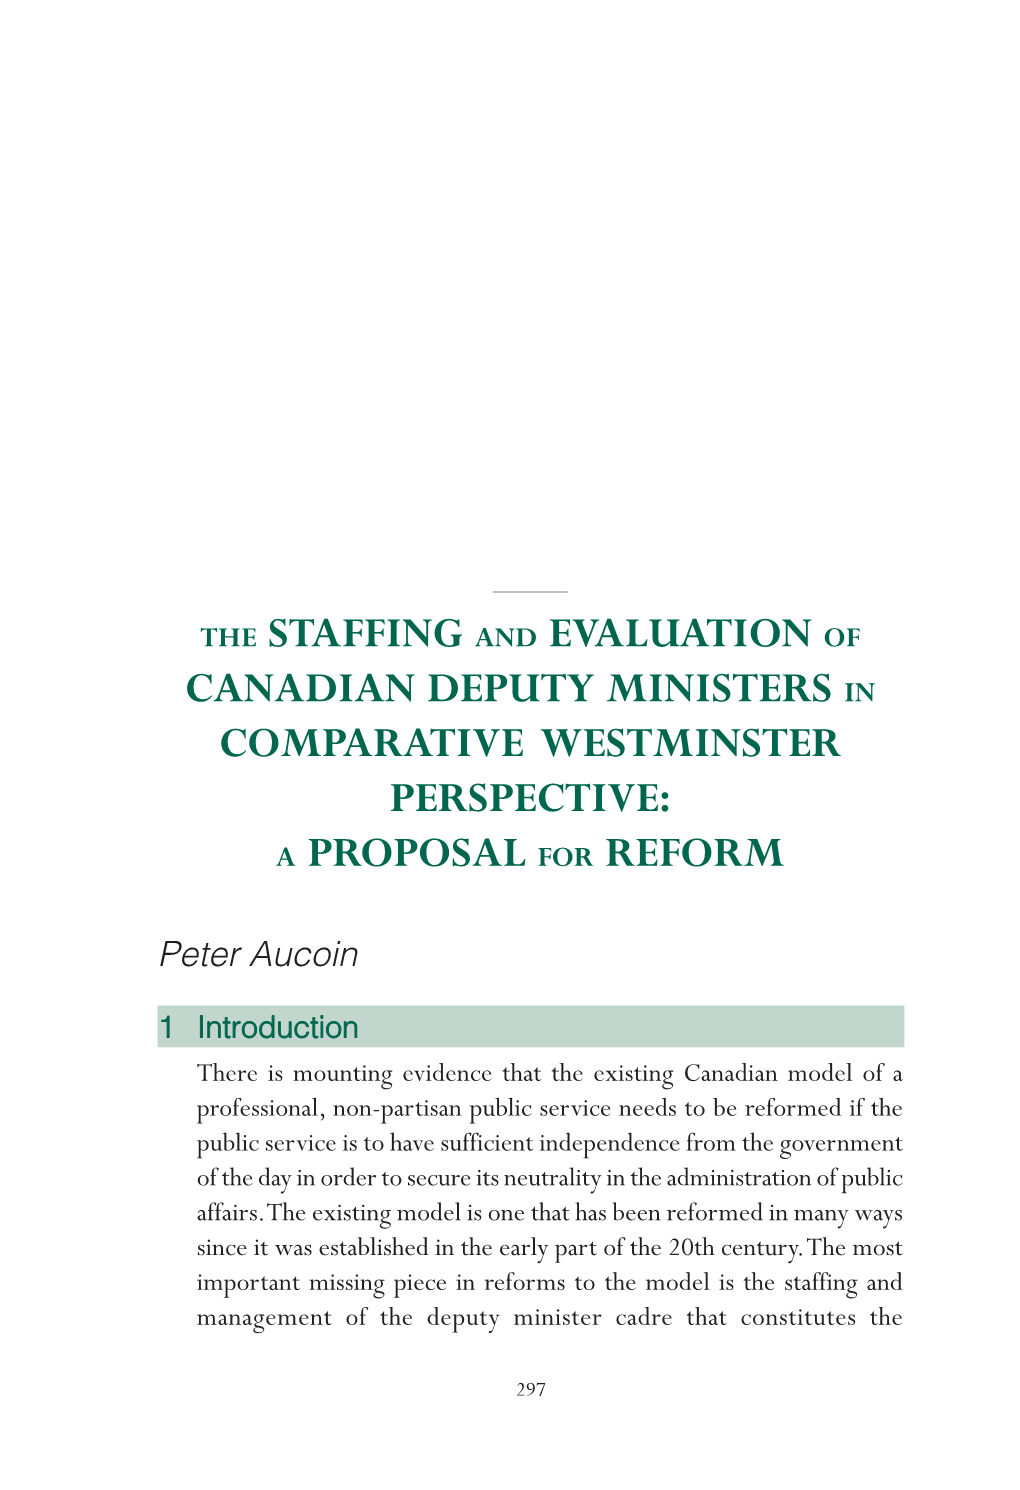 Canadian Deputy Ministers in Comparative Westminster Perspective: a Proposal for Reform